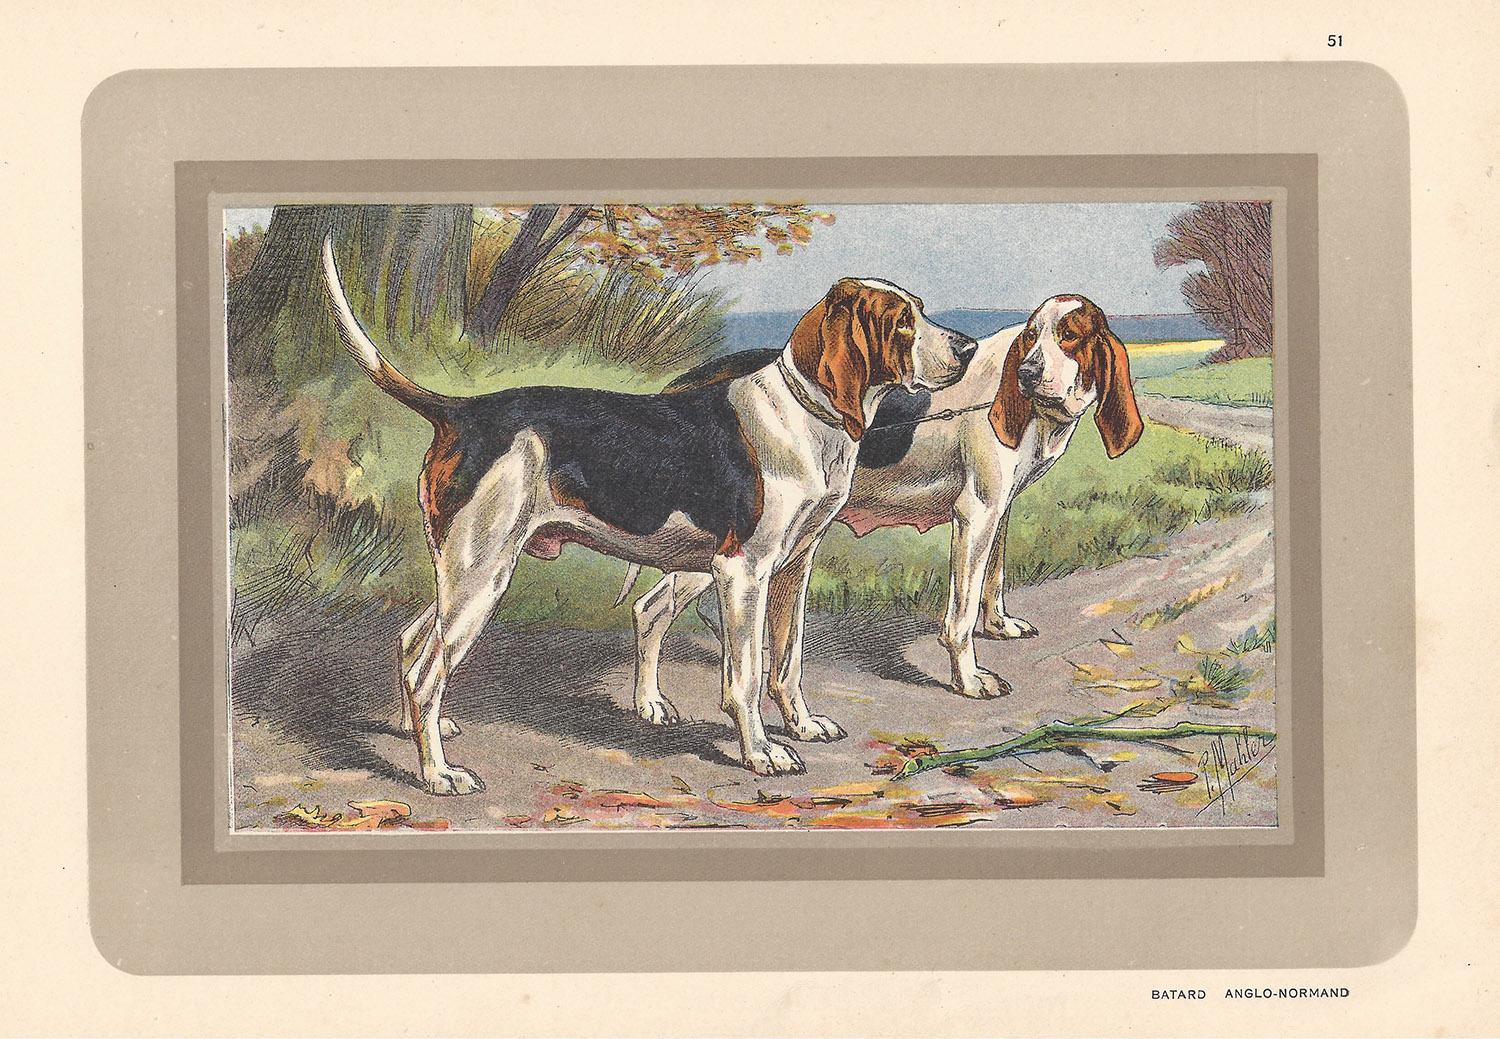 Animal Print P. Mahler - Batard Anglo-Normand, chien chromolithographe, chien franais, annes 1930